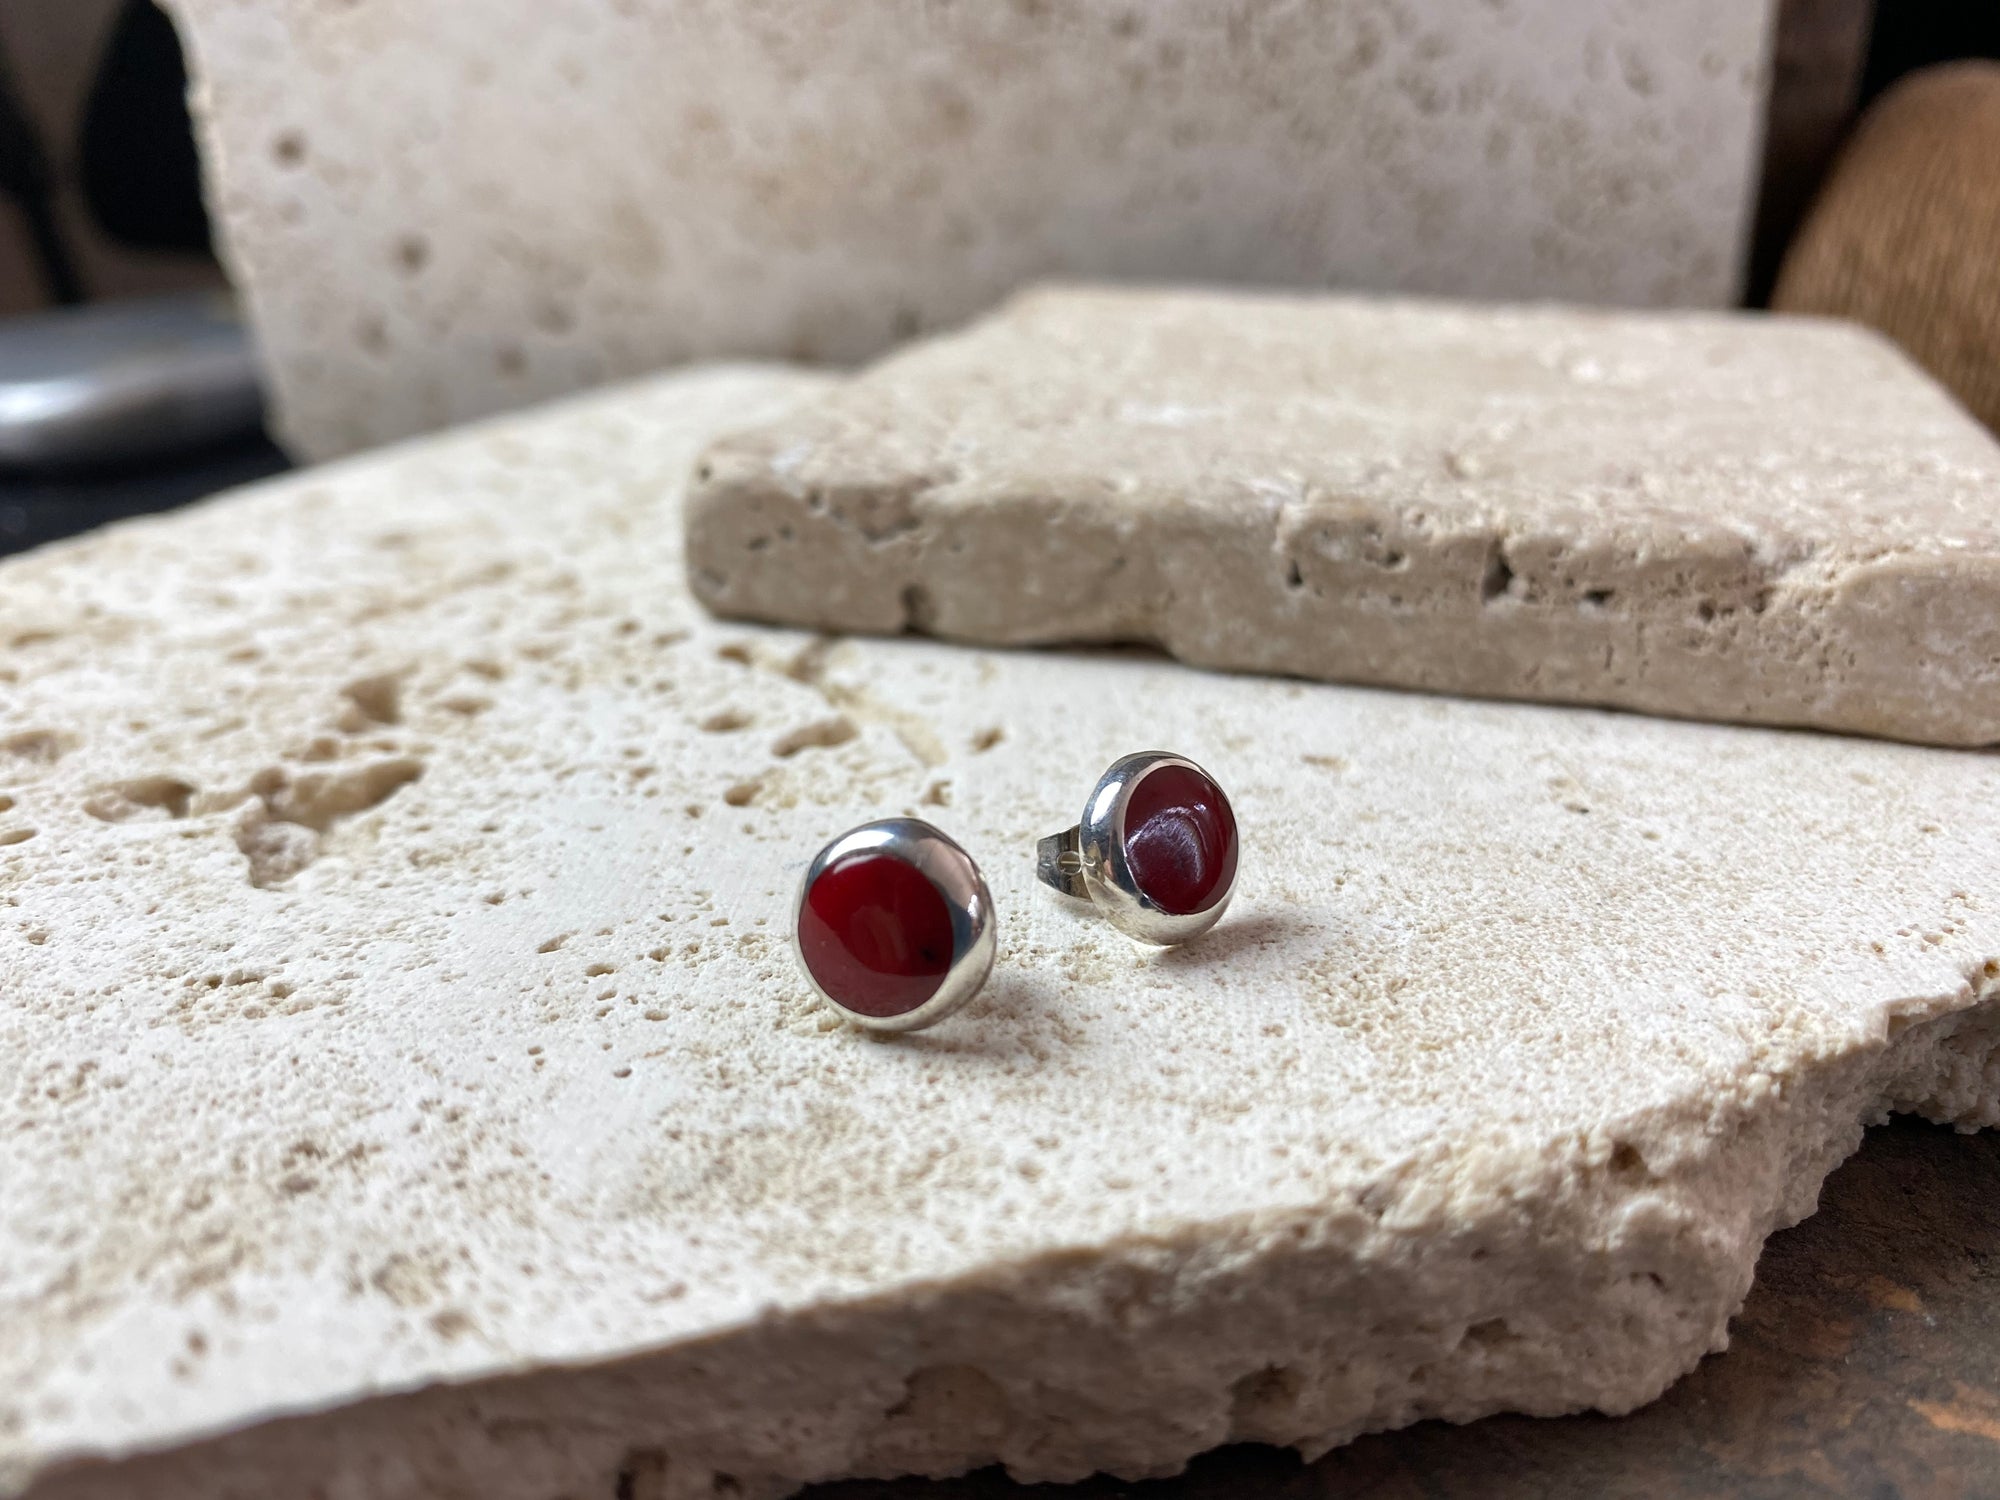 red carnelian studs are hand made from sterling silver and are slightly larger than the average earring stud